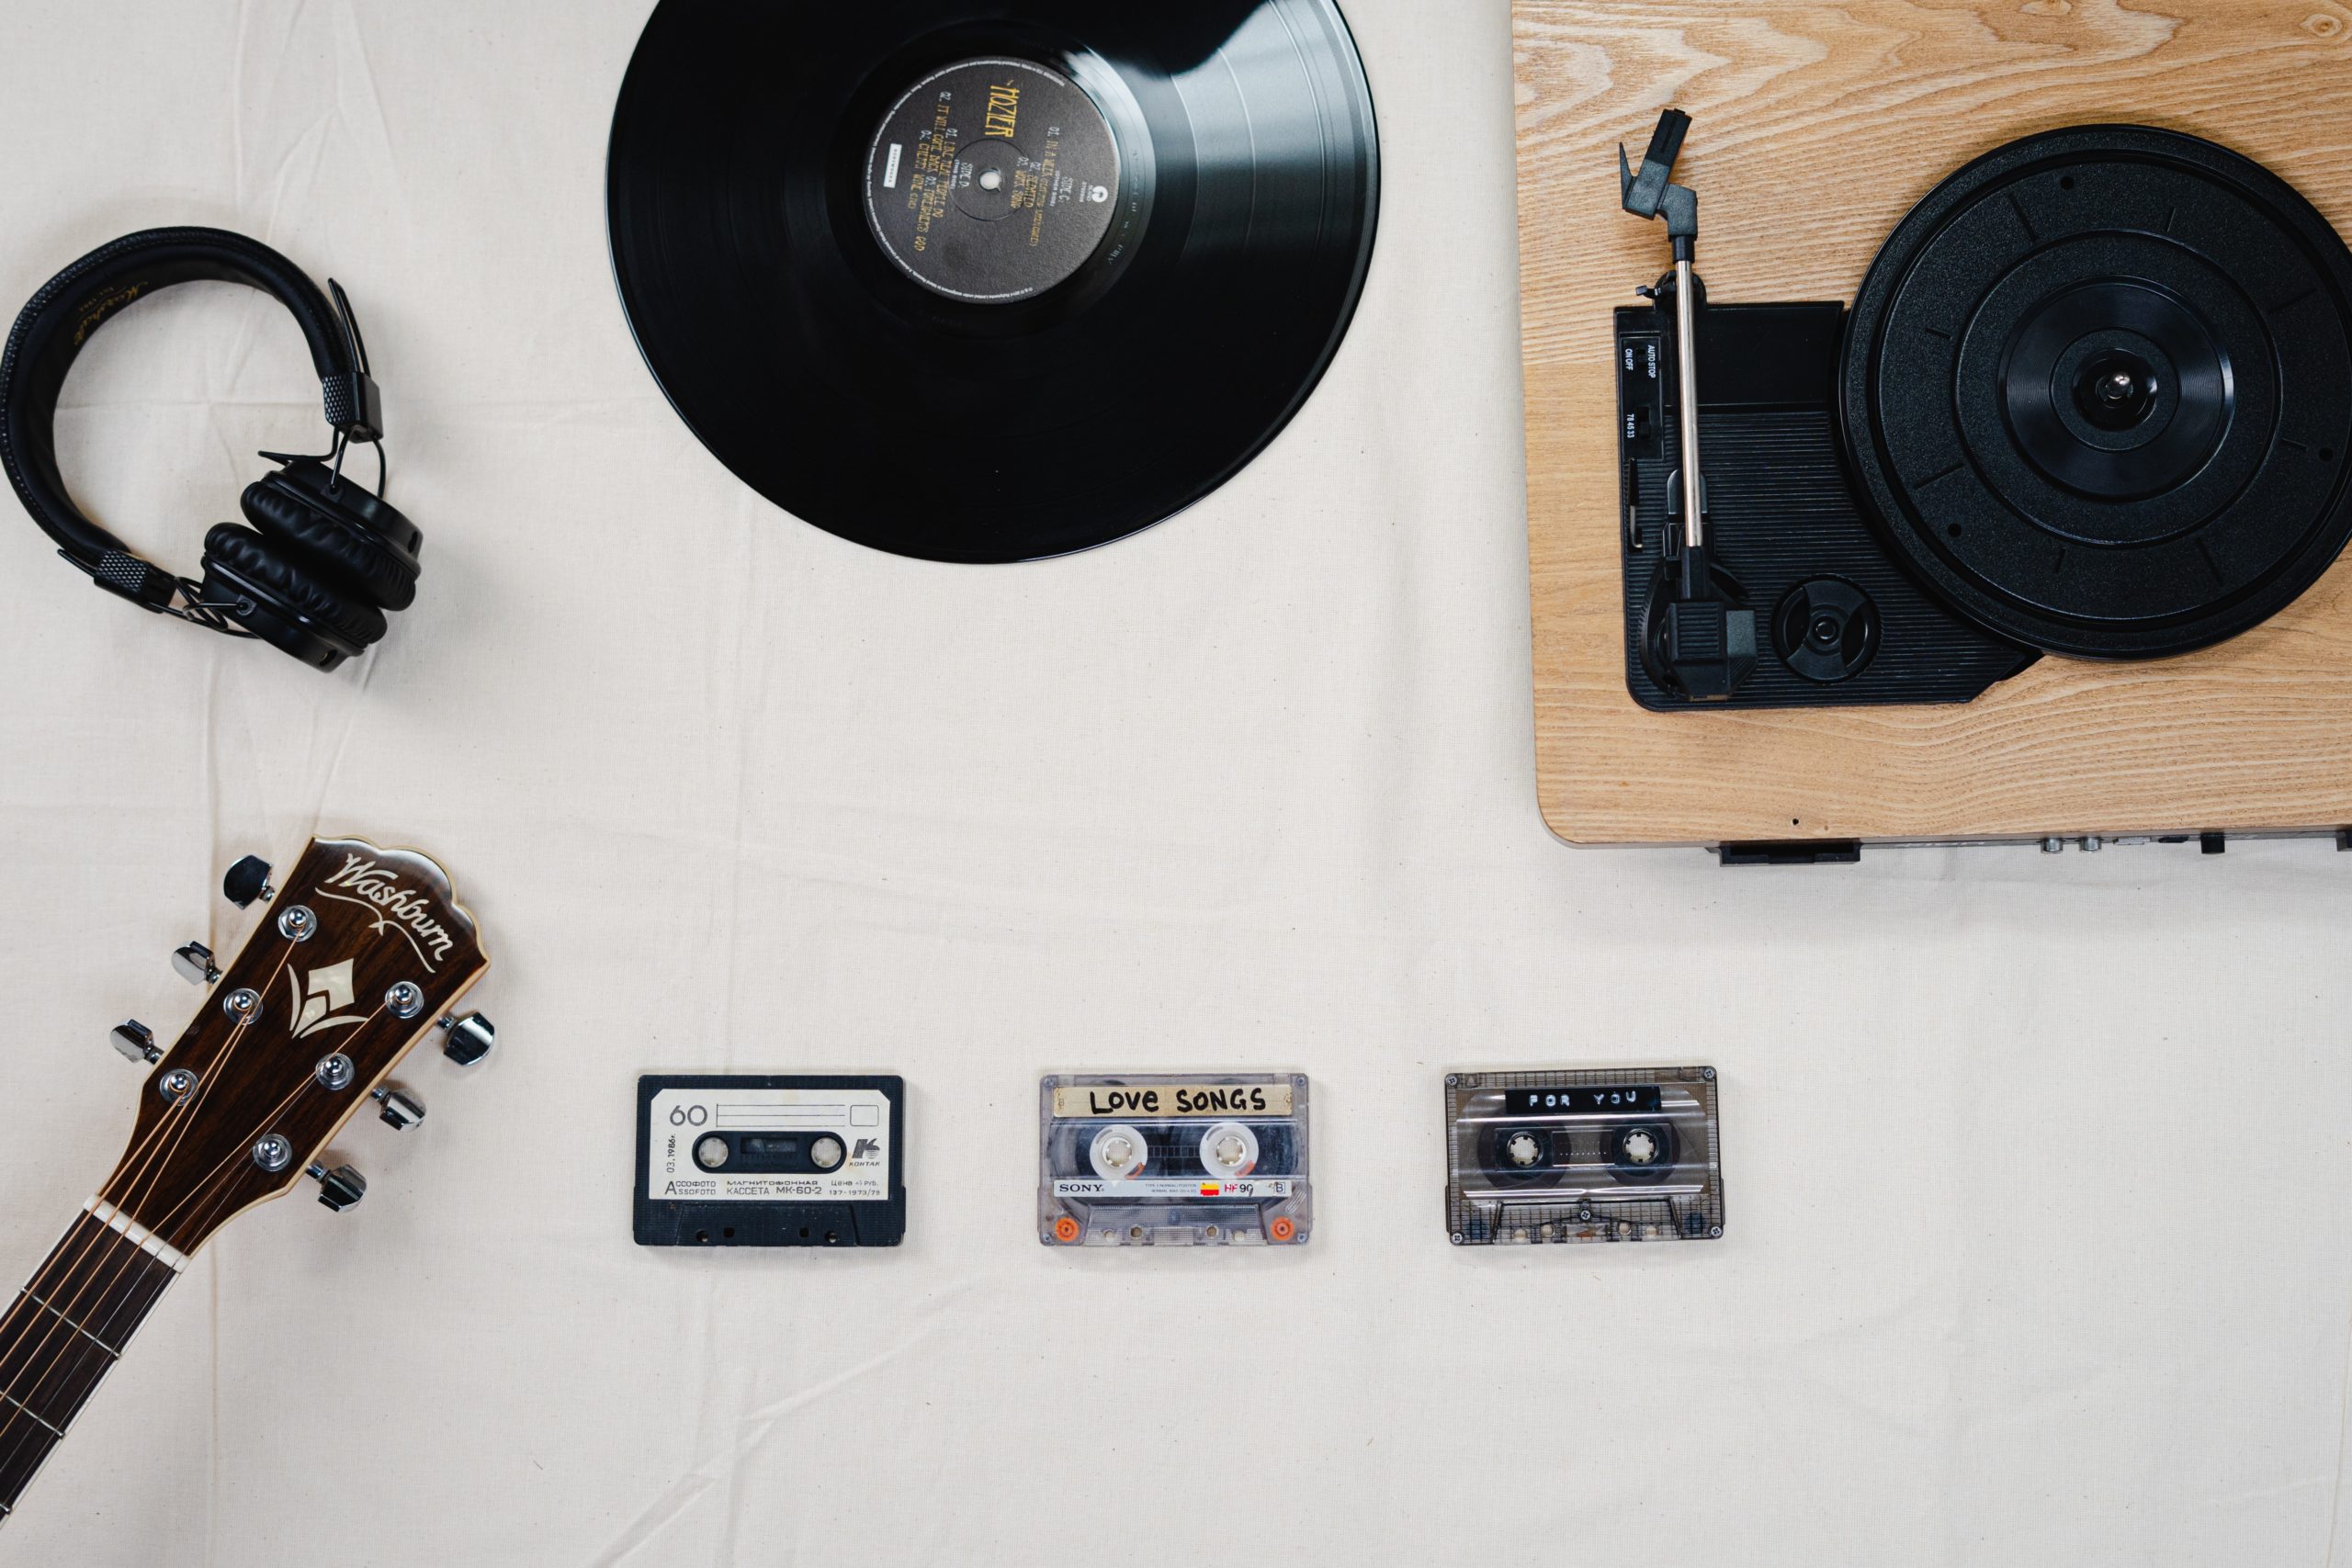 A record, cassette tapes, record player, and headphones laid out on a table